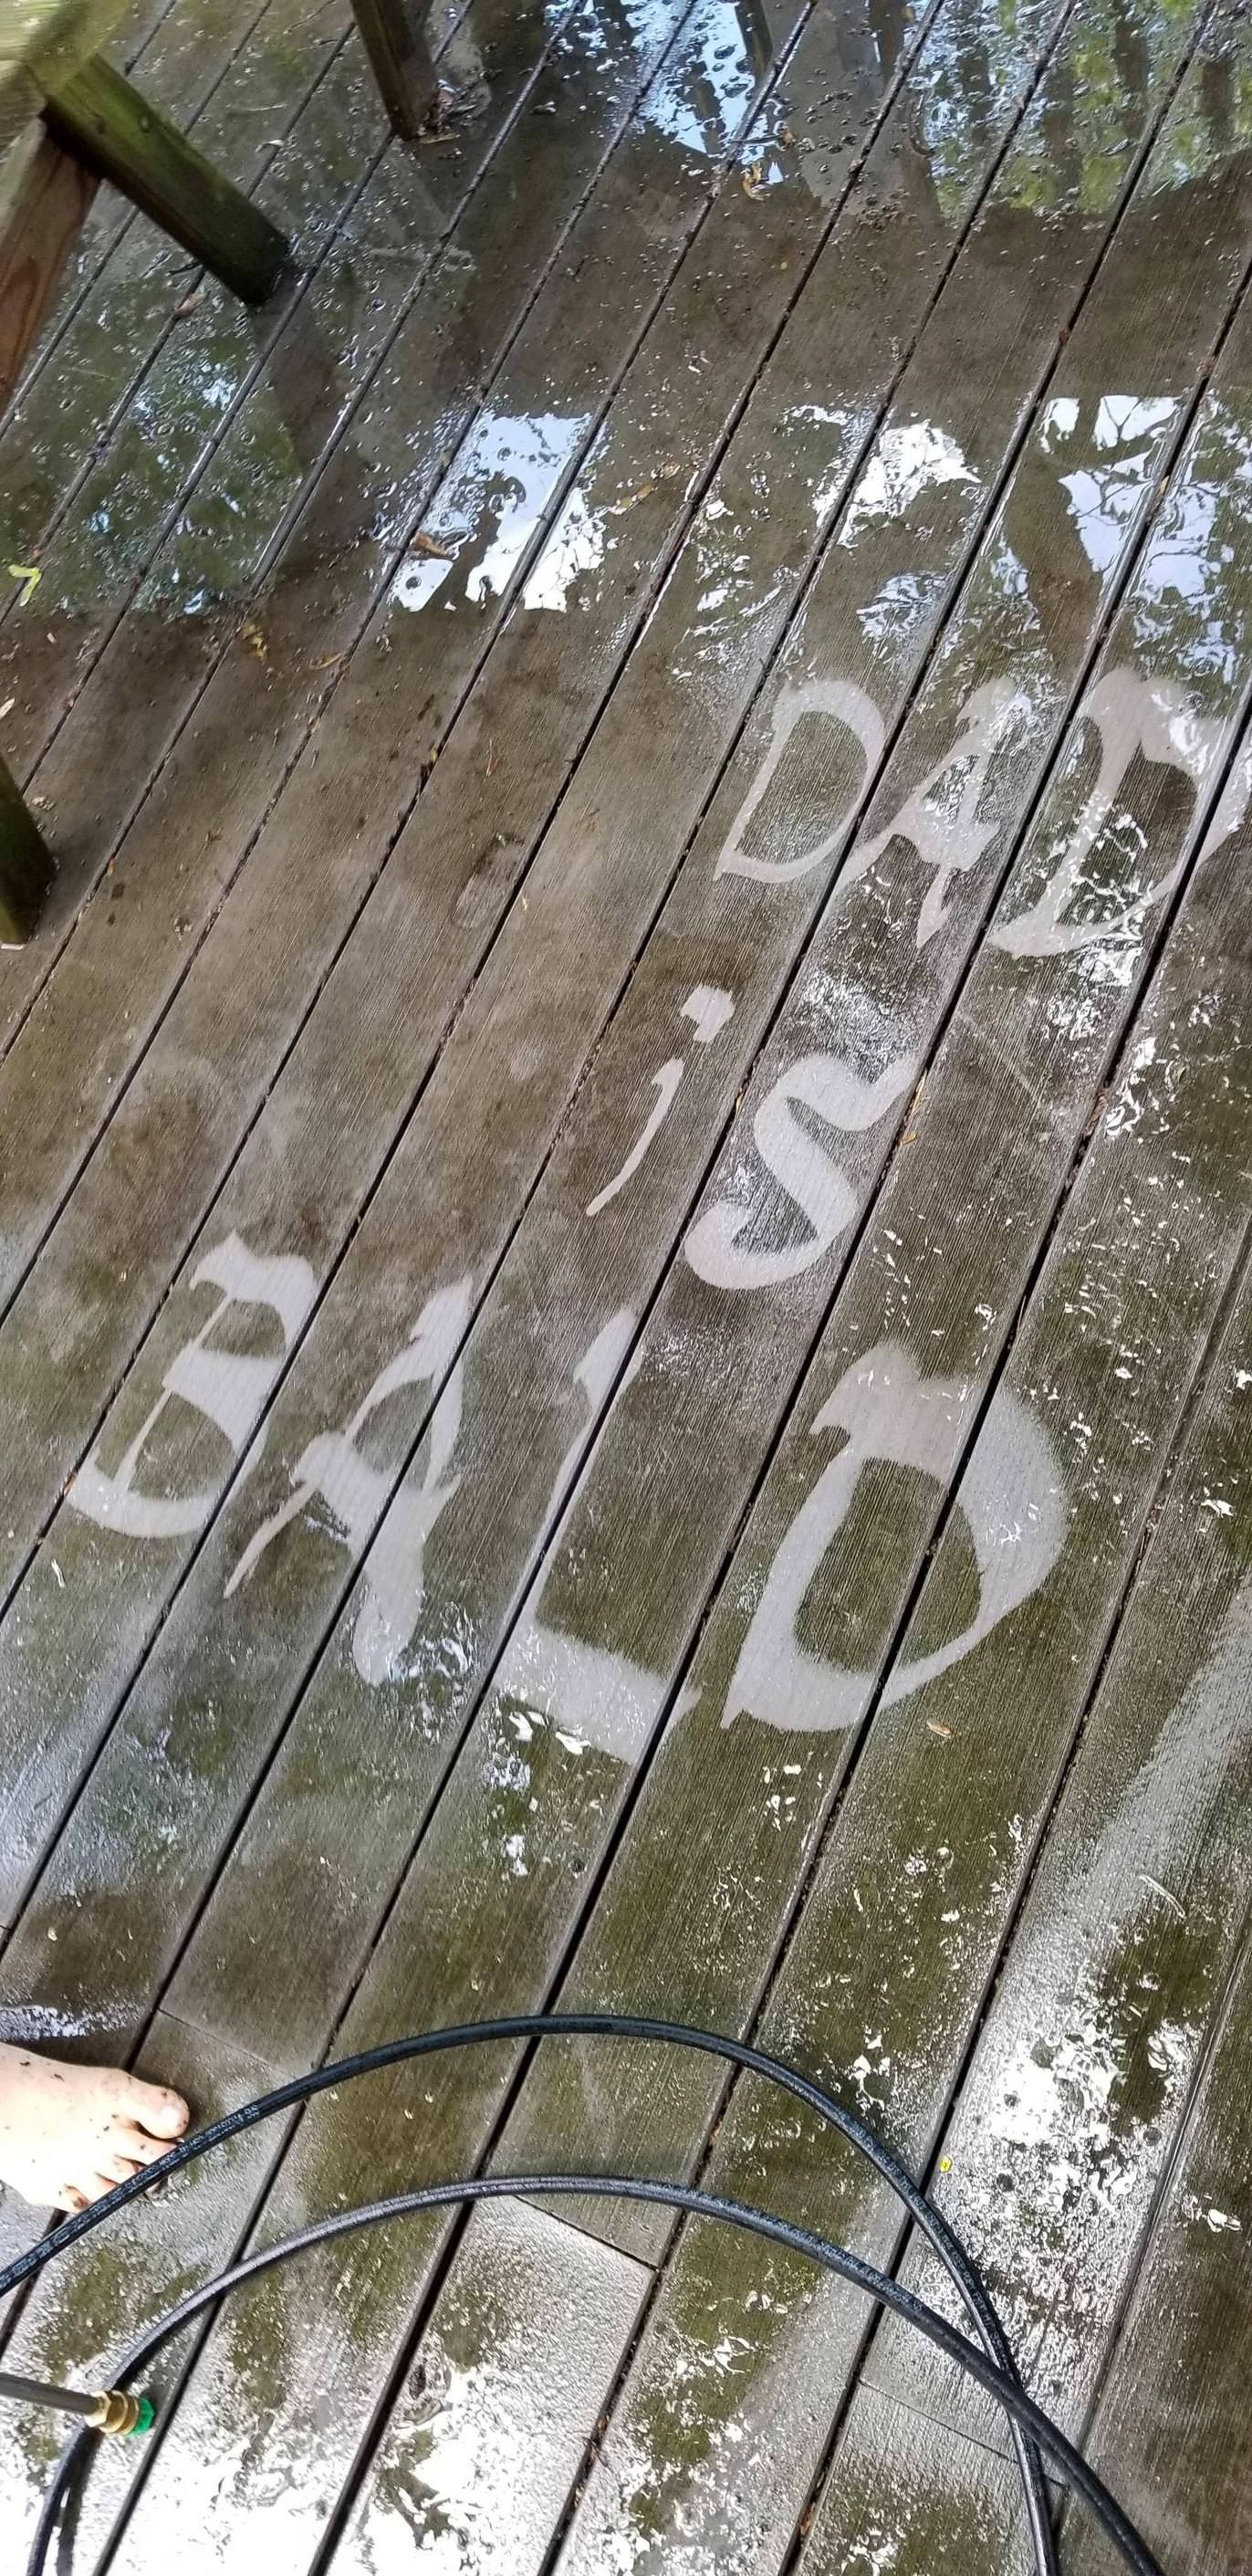 My kid's grounded so she had to help power wash the deck. I came back to this. Grounding extended.